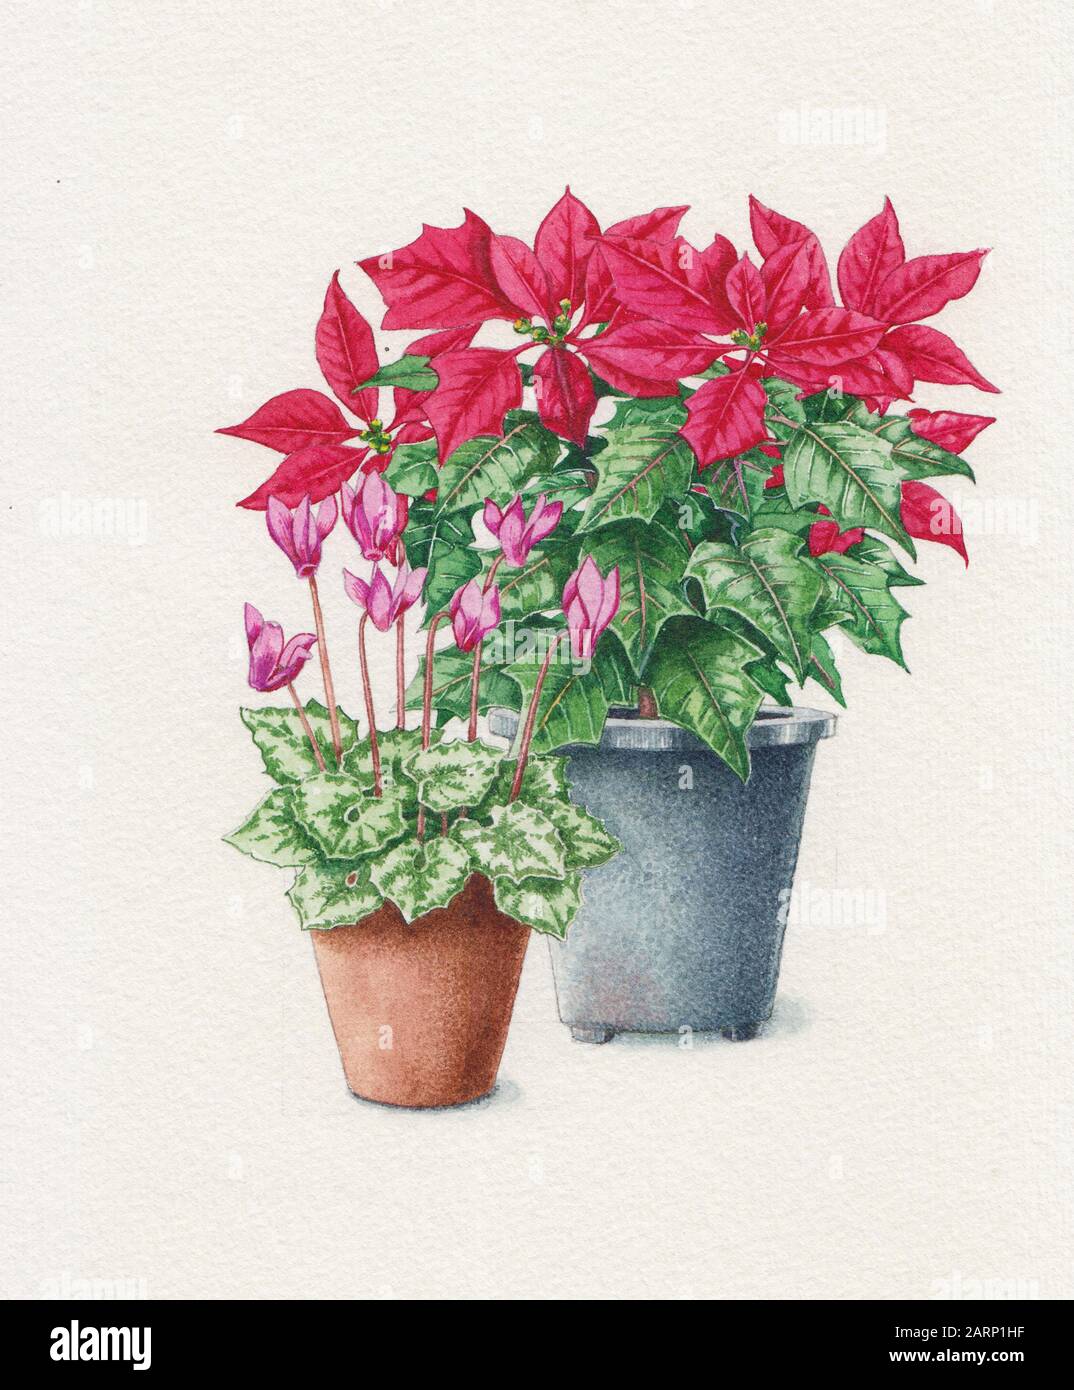 Poinsettia and cyclamen plants in pots Stock Photo